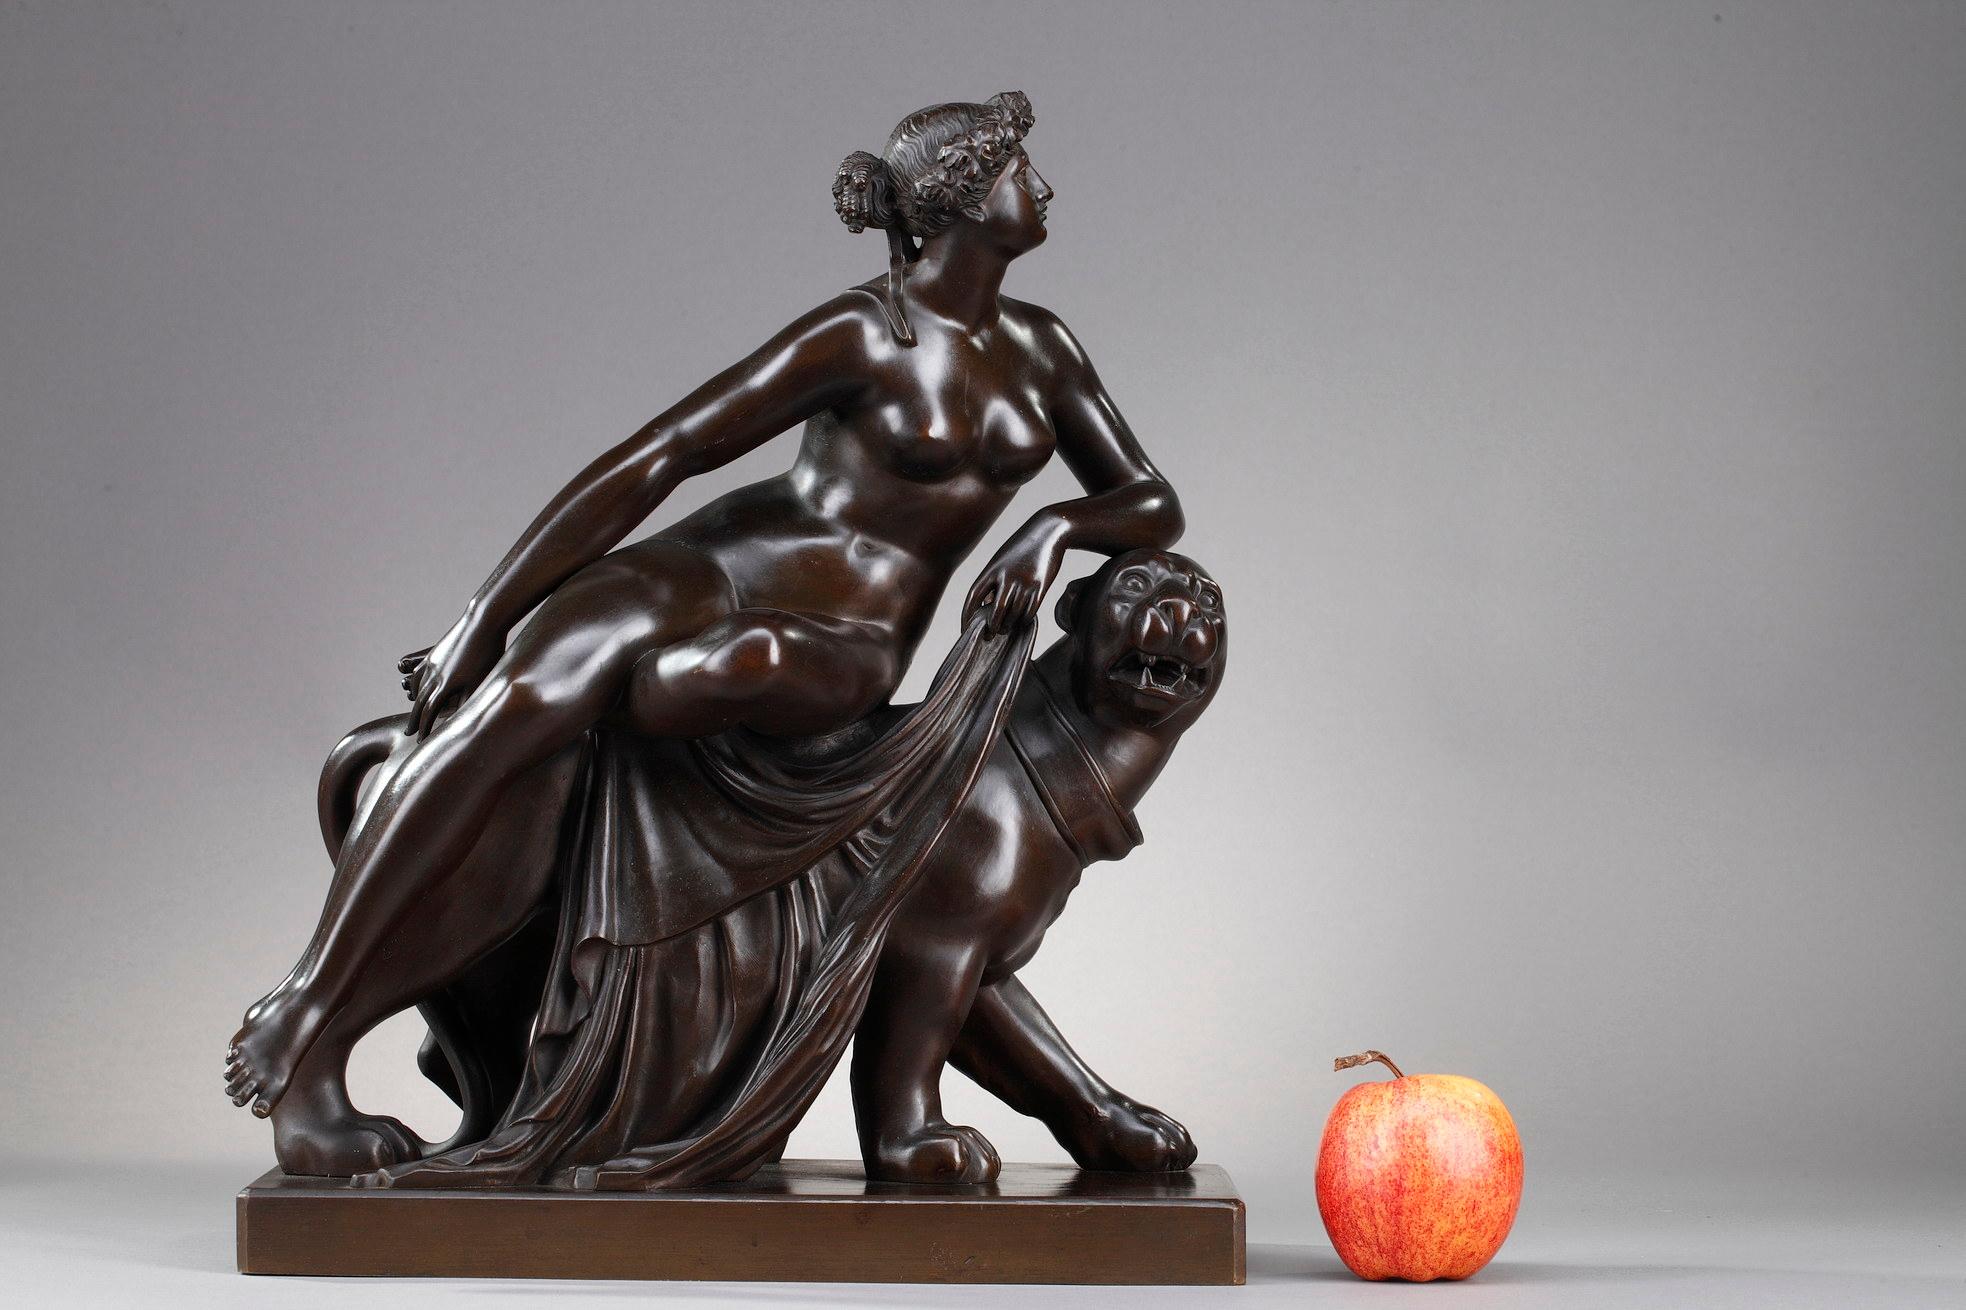 Bronze group representing Ariadne riding a panther after a work by Johann Heinrich Dannecker. It represents a young nude woman wearing a crown of vine leaves as she is the wife of the god of wine Dionysus. She is represented in a calm attitude. It